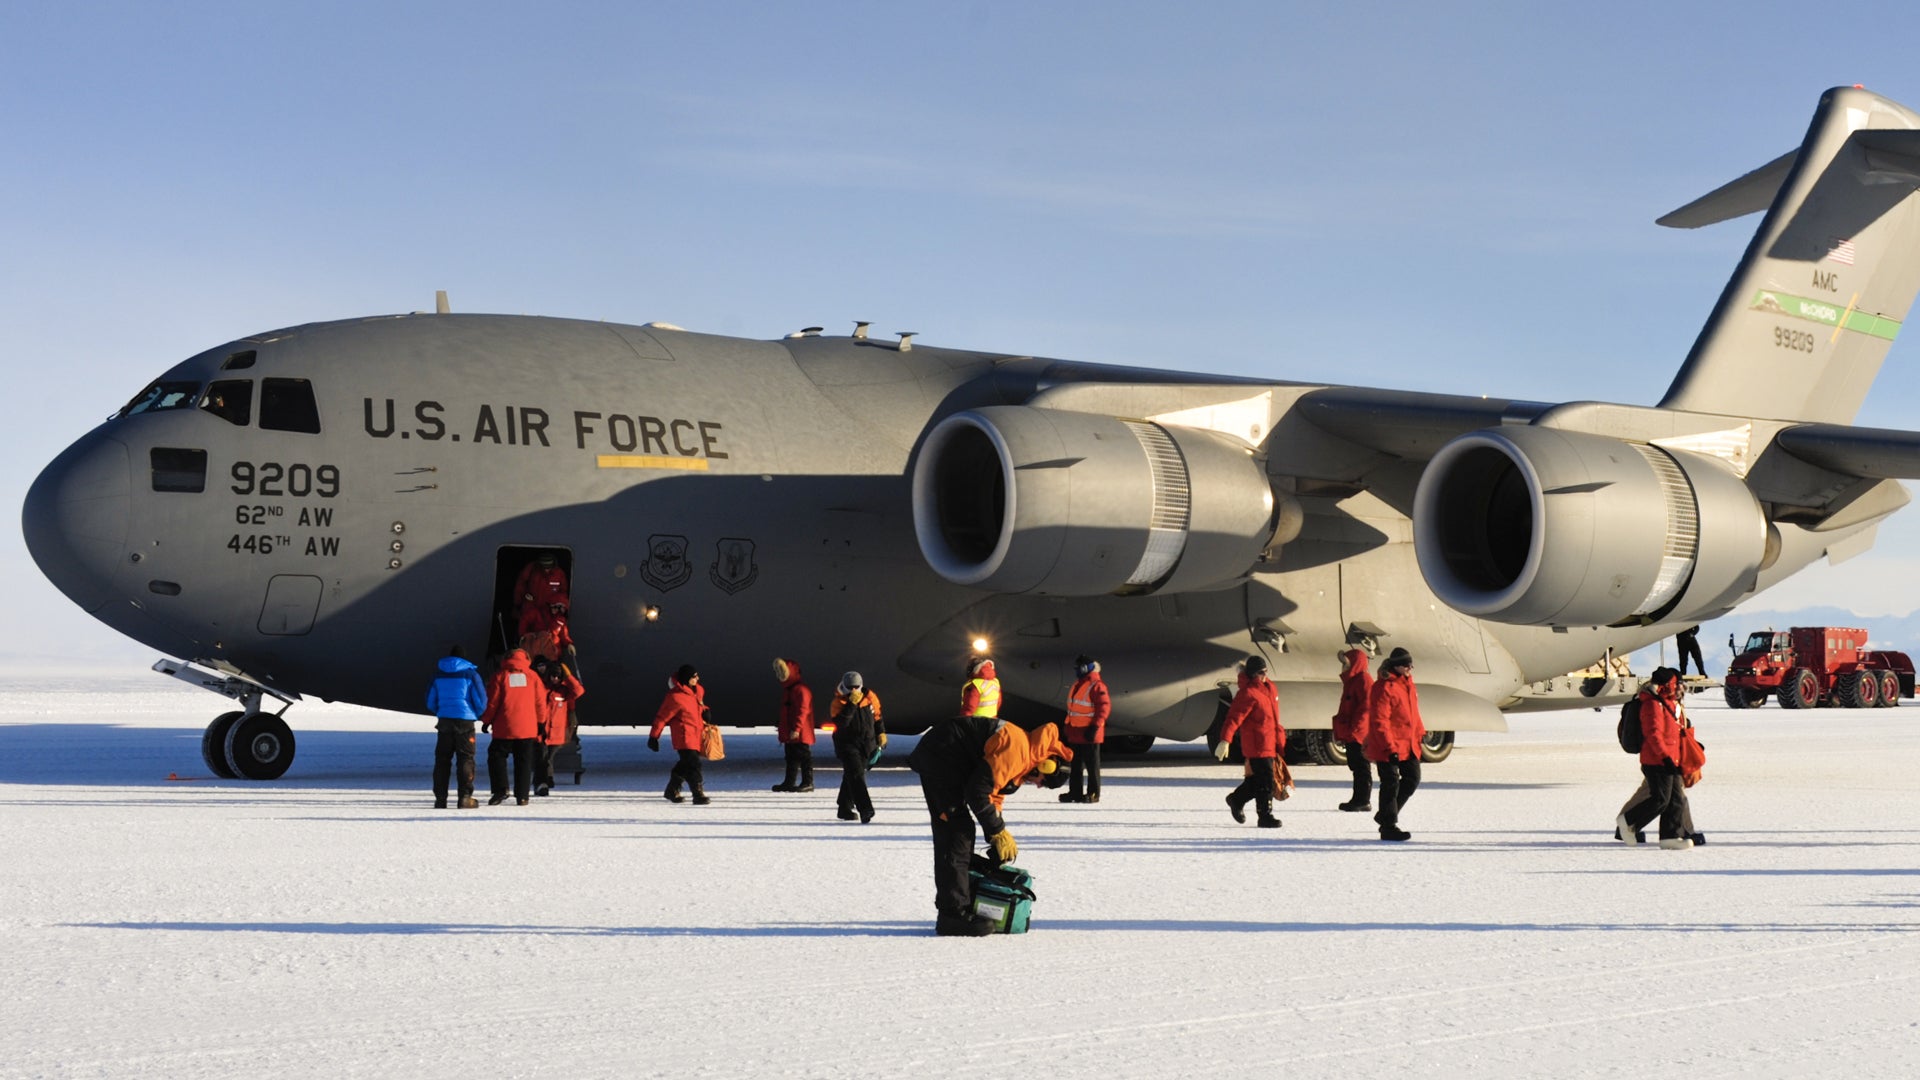 National Science Foundation personnel exit a C-17 Globemaster III aircraft, Oct. 1, 2012, at McMurdo Station, Antarctica. Every year, Airmen from the 62nd and 446th Airlift Wings at Joint Base Lewis-McChord deploy to transport cargo and personnel in support of the NSF and Operation Deep Freeze. (Staff Sgt. Sean Tobin/U.S. Air Force)